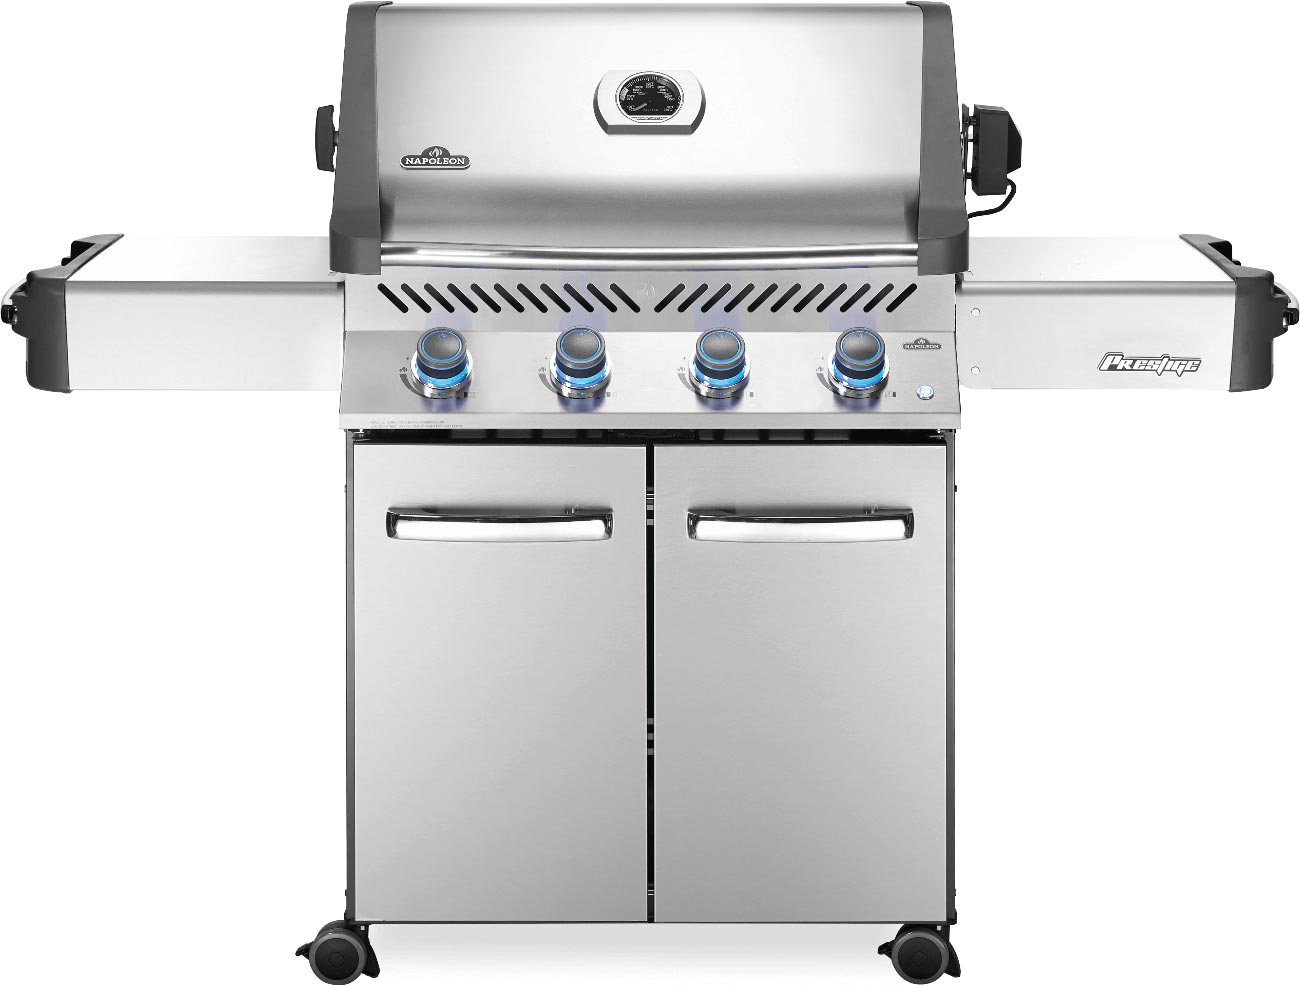 Napoleon Grills Prestige 500 Gas Grill on Cart, Stainless Steel Outdoor Grills